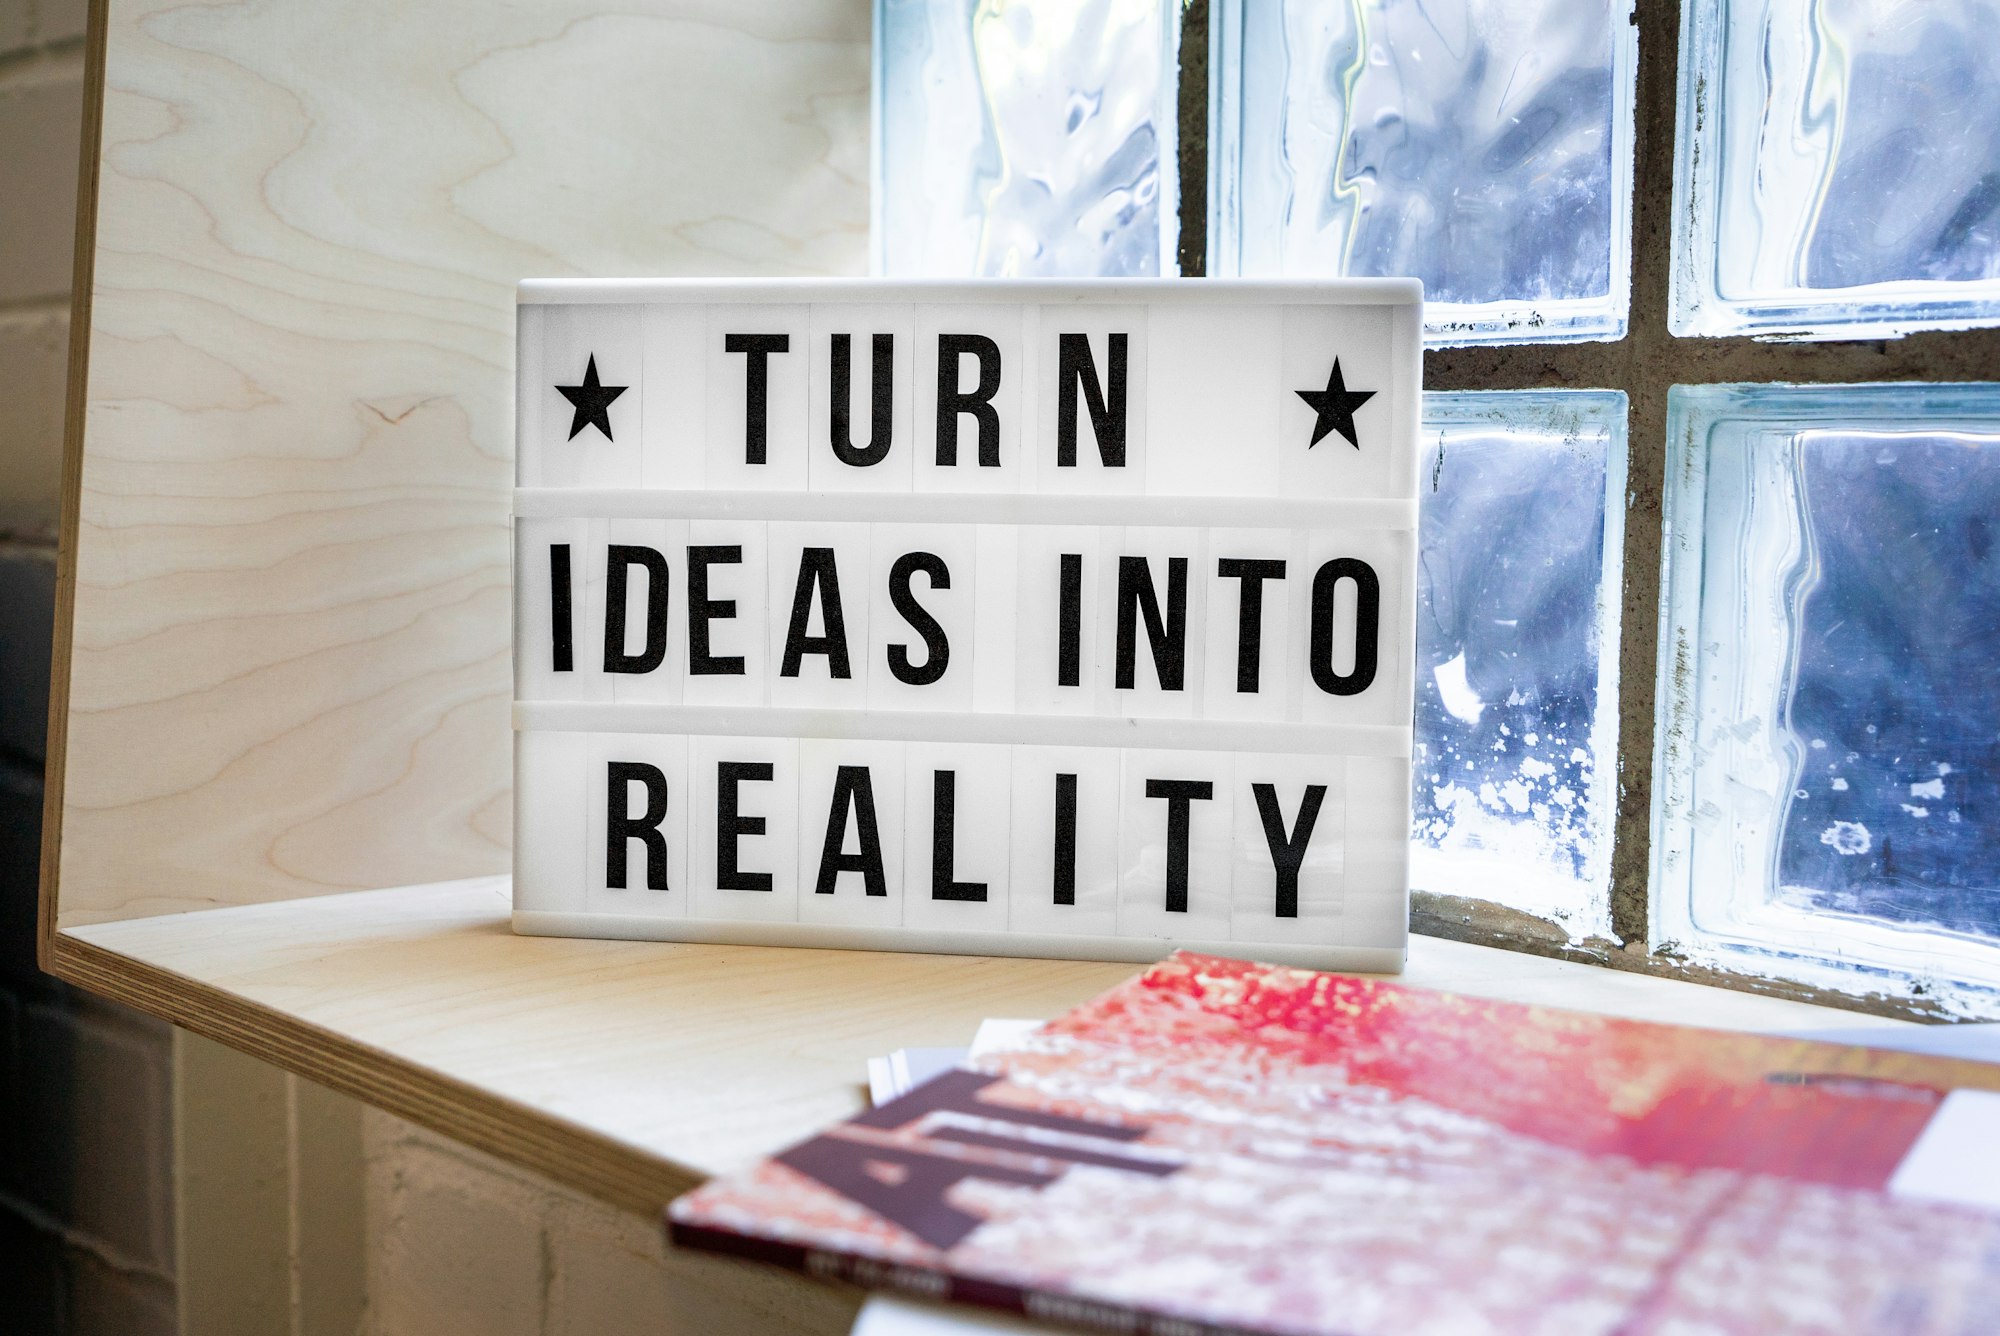 Turn Ideas into Reality! A motivational sign in a Co-Working Space. 